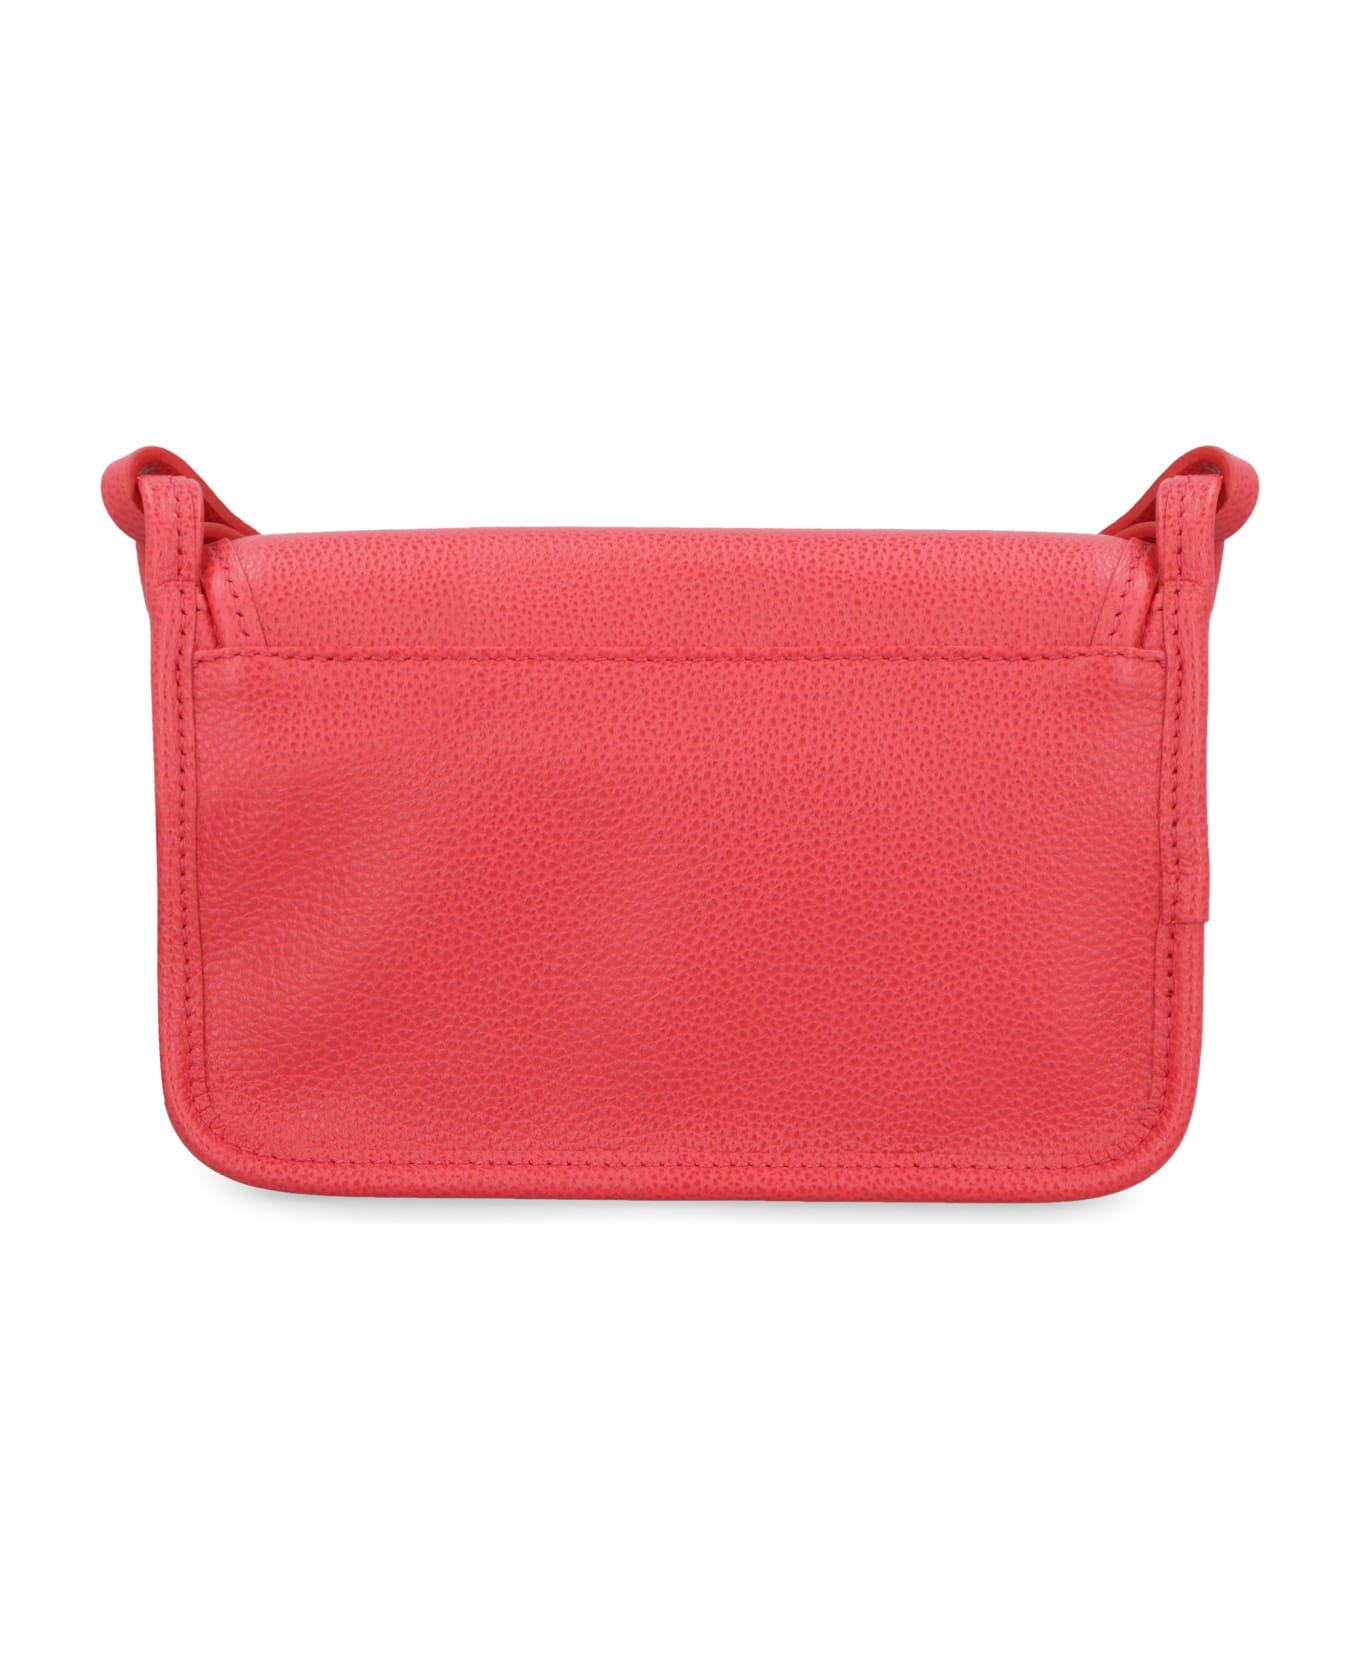 Longchamp Le Foulonné Leather Crossbody Bag - red ショルダーバッグ